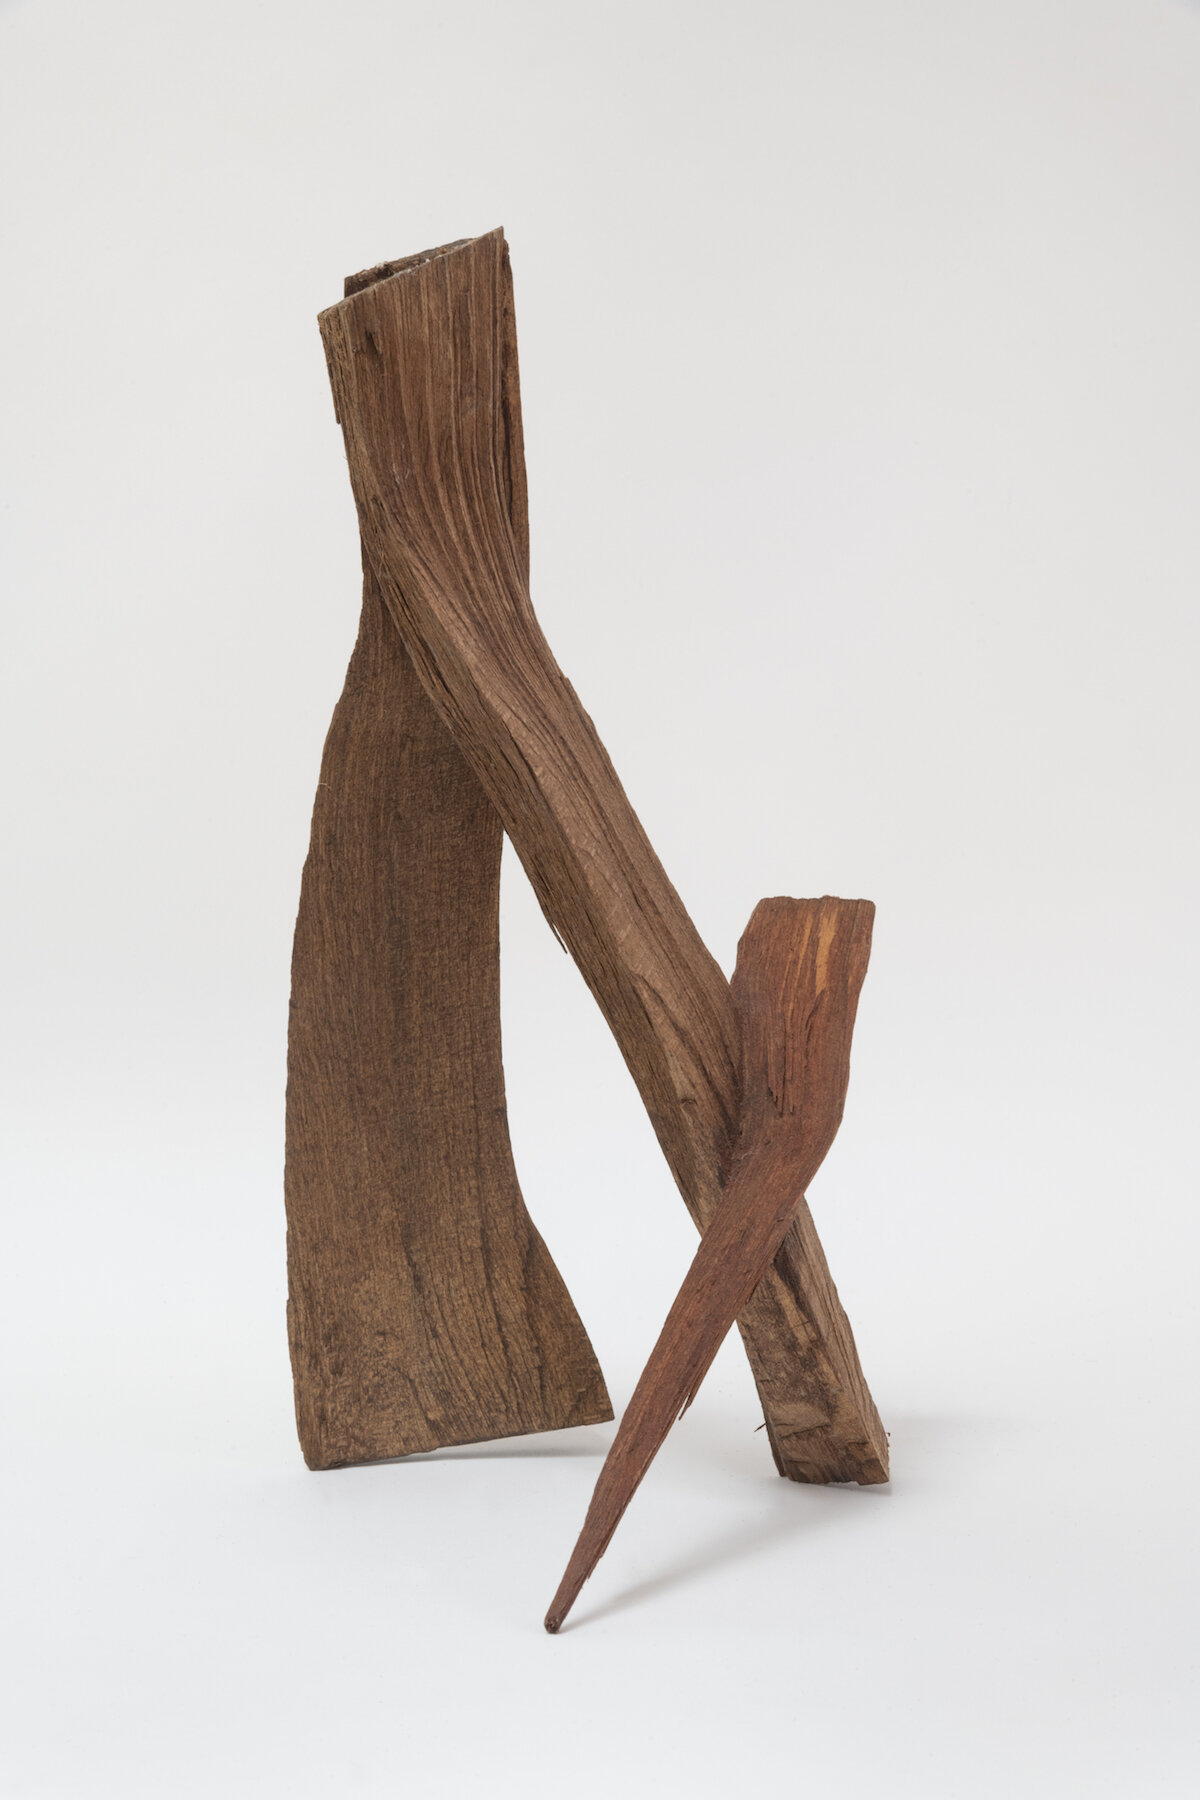  Untitled #5, 2000s / Mixed wood / 11 x 8.5 x 10 inches / 28 cm x 21 cm x 25,4 cm 